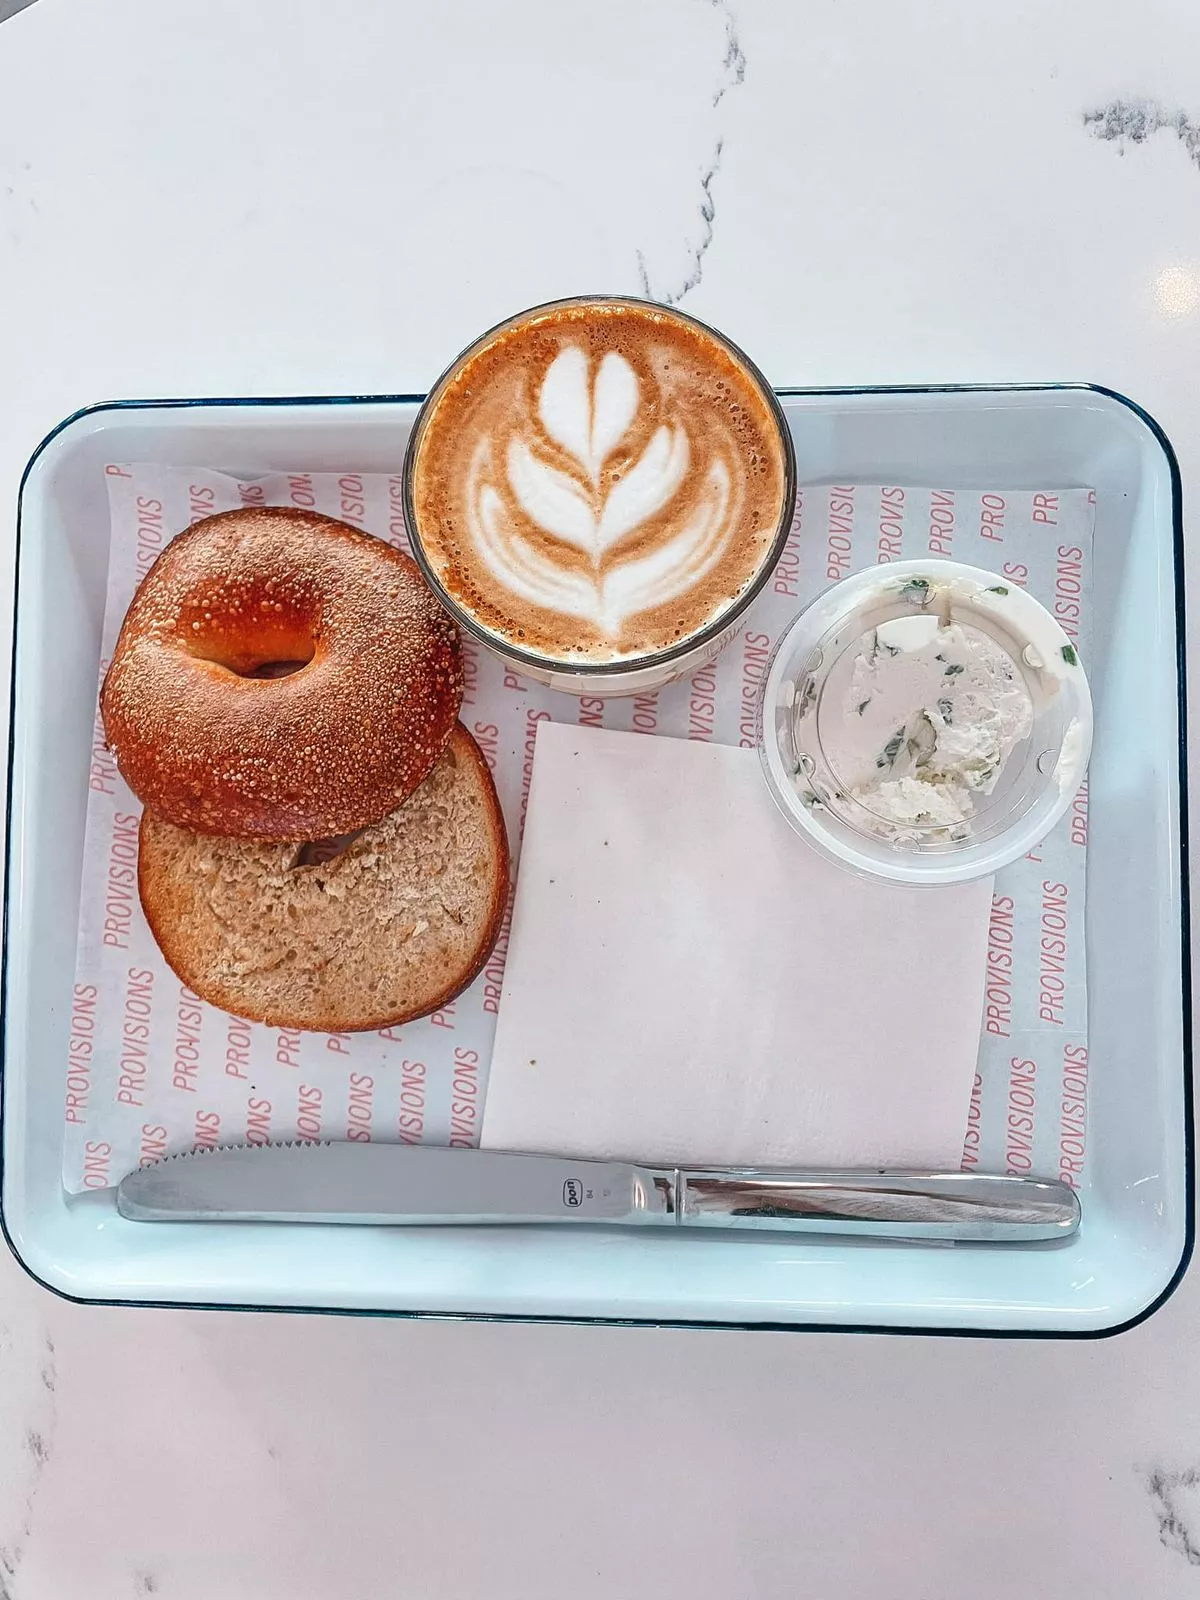 Willas Tampa bagel, cream cheese, and cappuccino